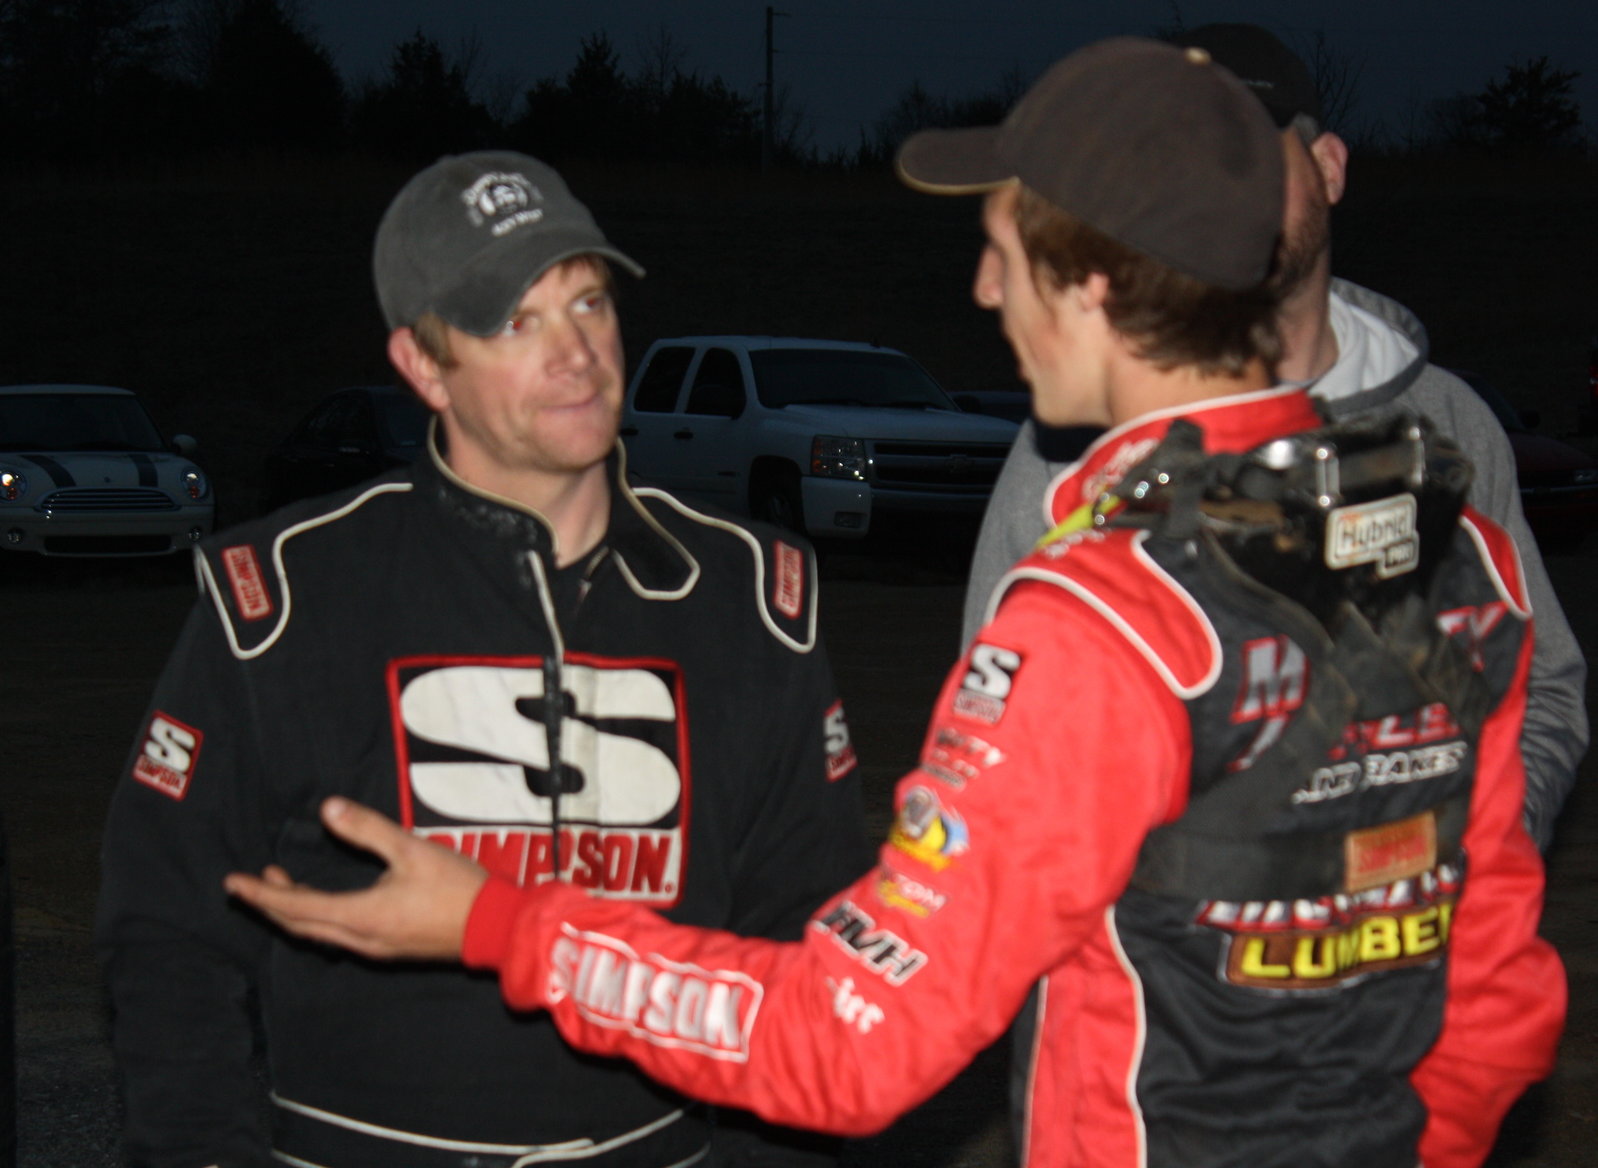 Greg Martin and Mack McCarter talk during a break in the action at Volunteer Speedway.